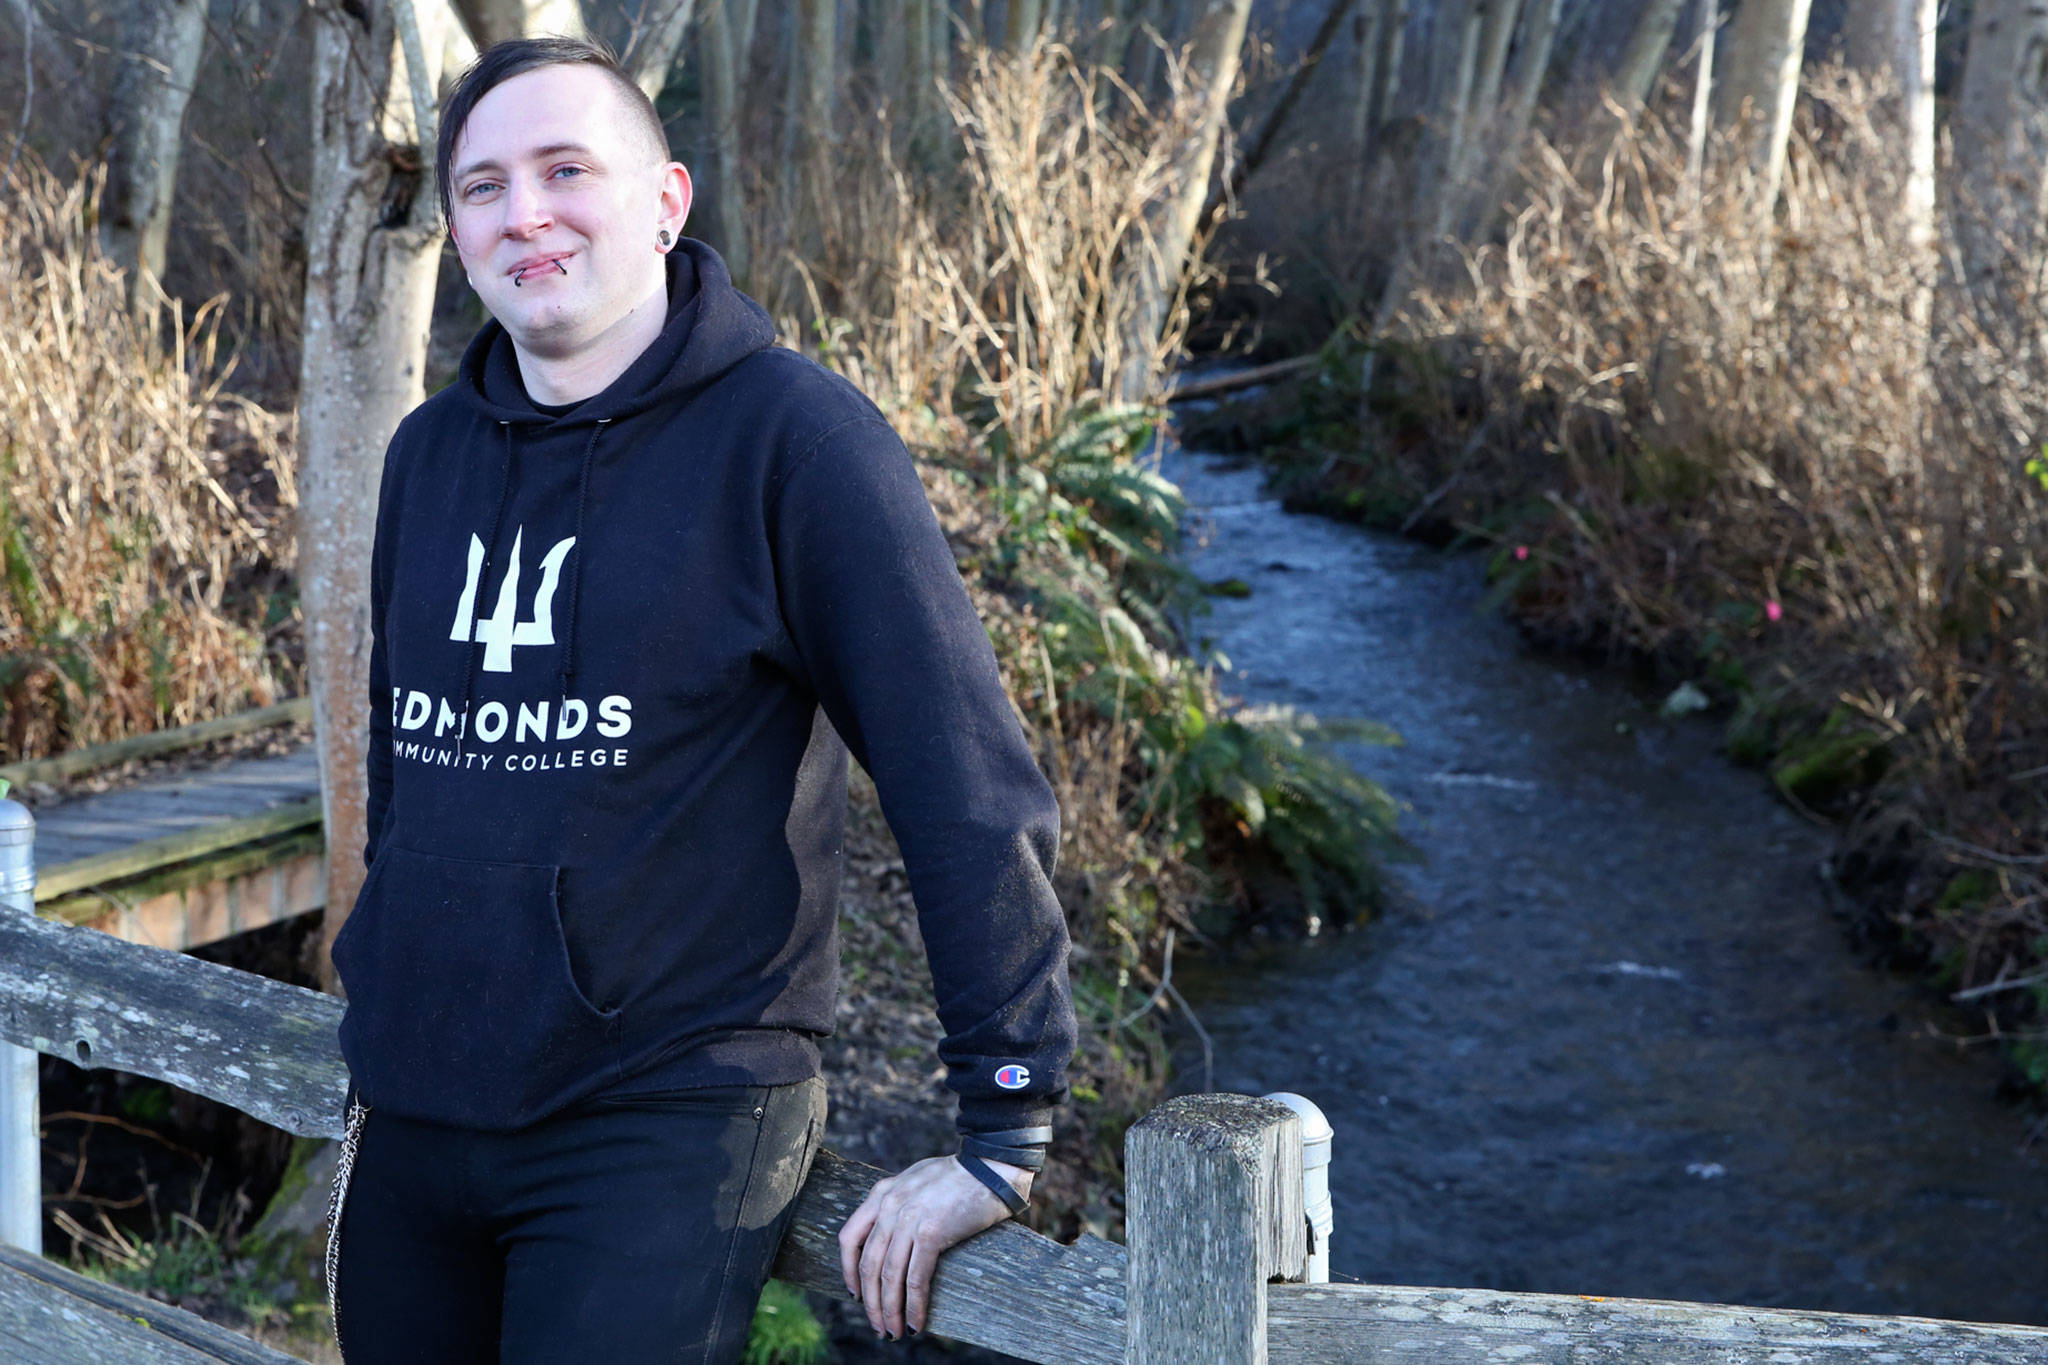 Lazarus Hart was named a state scholar representing Edmonds Community College for studies on campus and work in surveying the Japanese Gulch in Mukilteo. (Kevin Clark / The Herald)